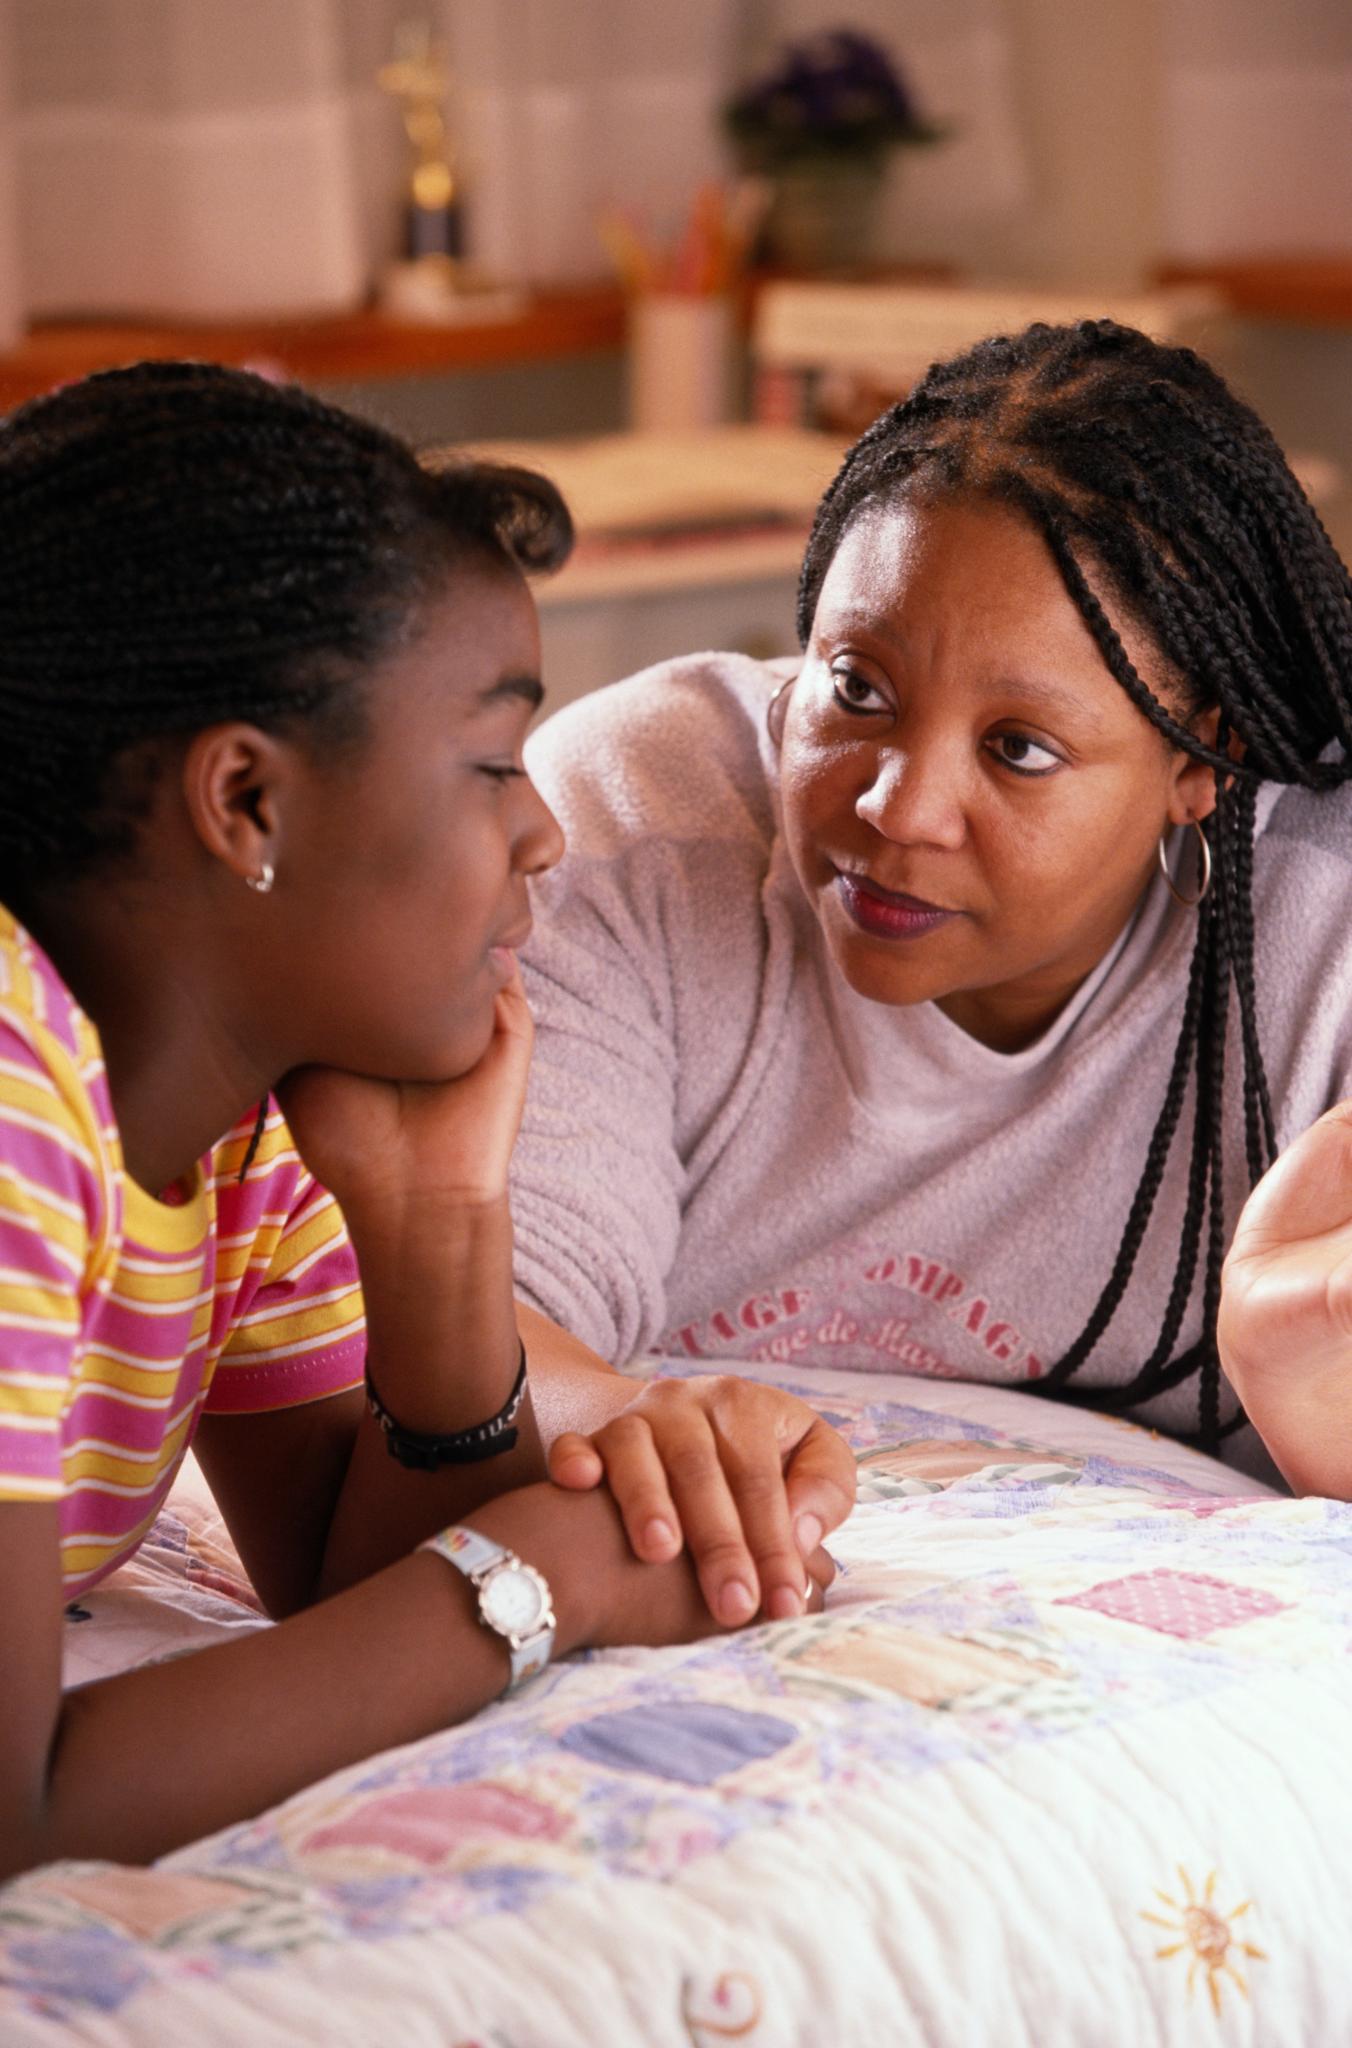 How Do You Educate Your Children About HIV/AIDS?